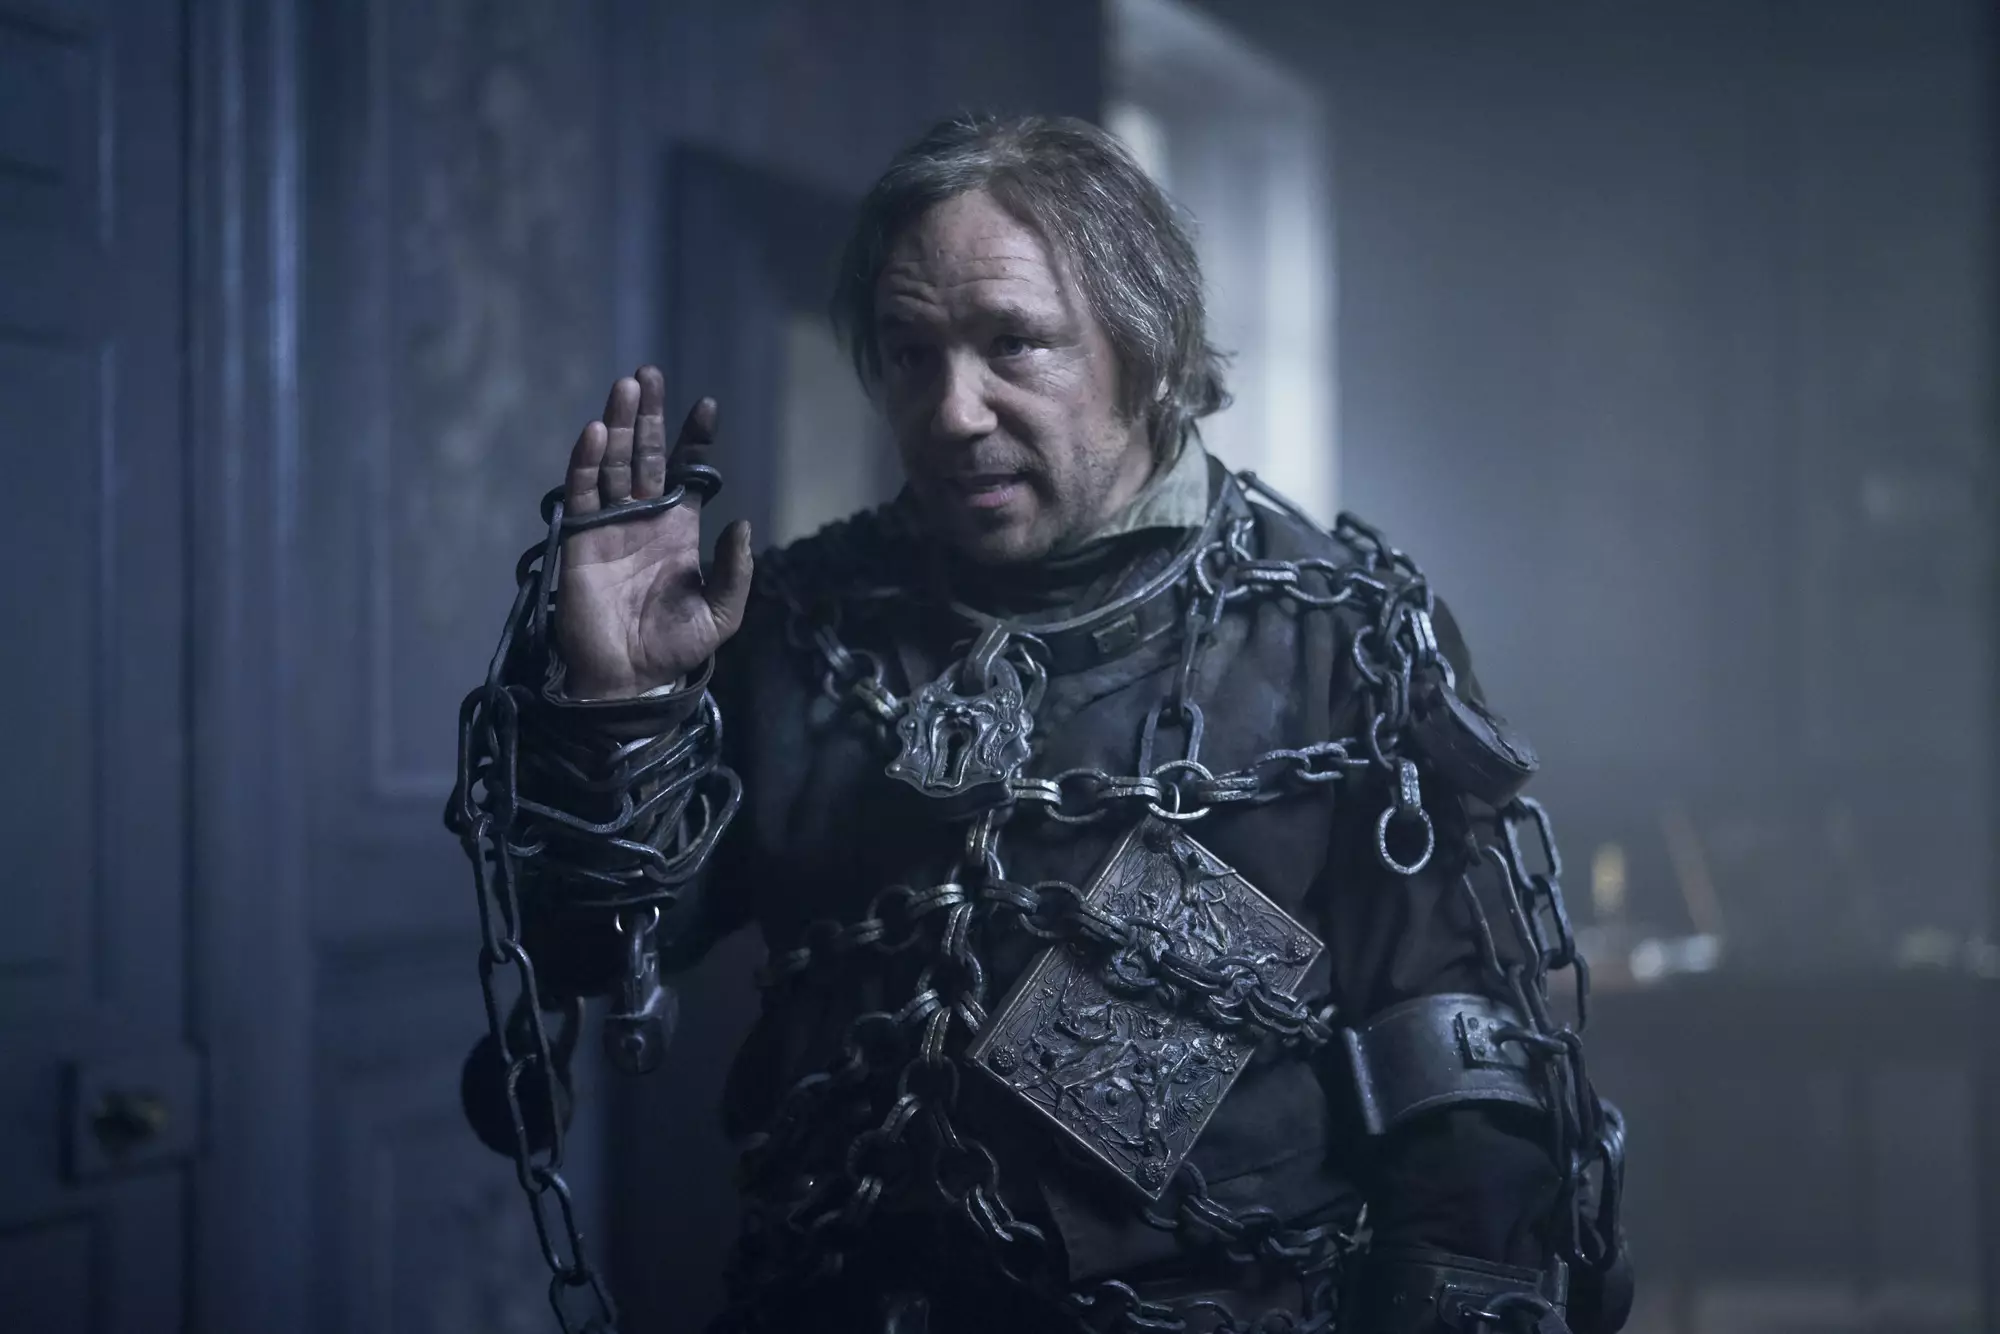 'This Is England' star Stephen Graham is the ghostly vision of Jacob Marley (